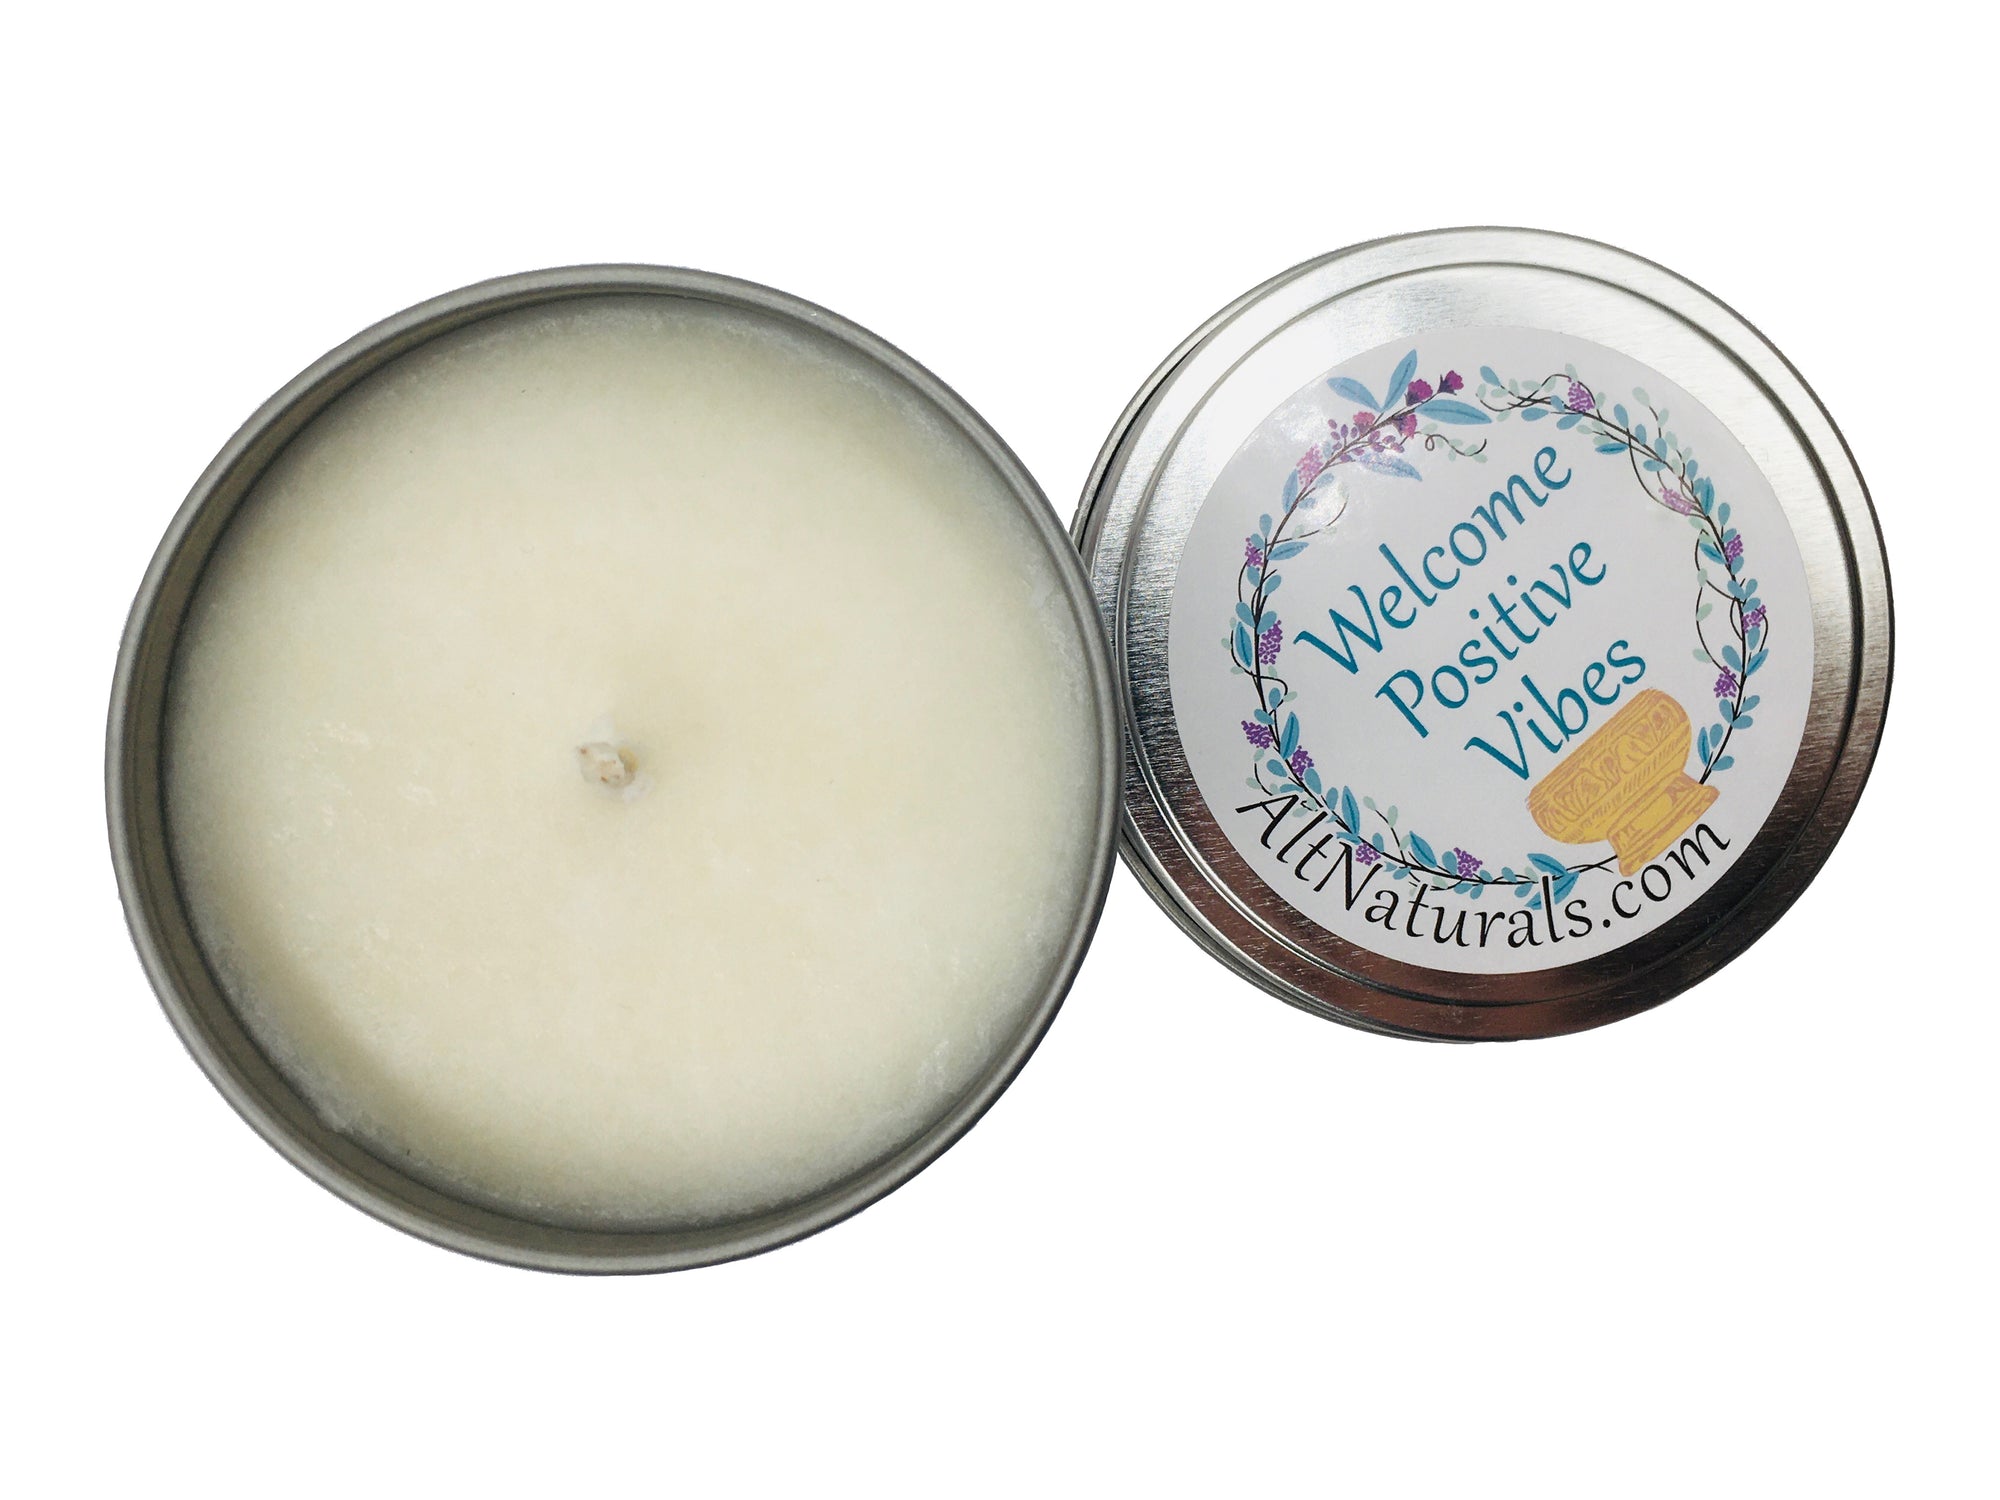 Cleansing White Sage Soy Candles - 6 Ounce (1)